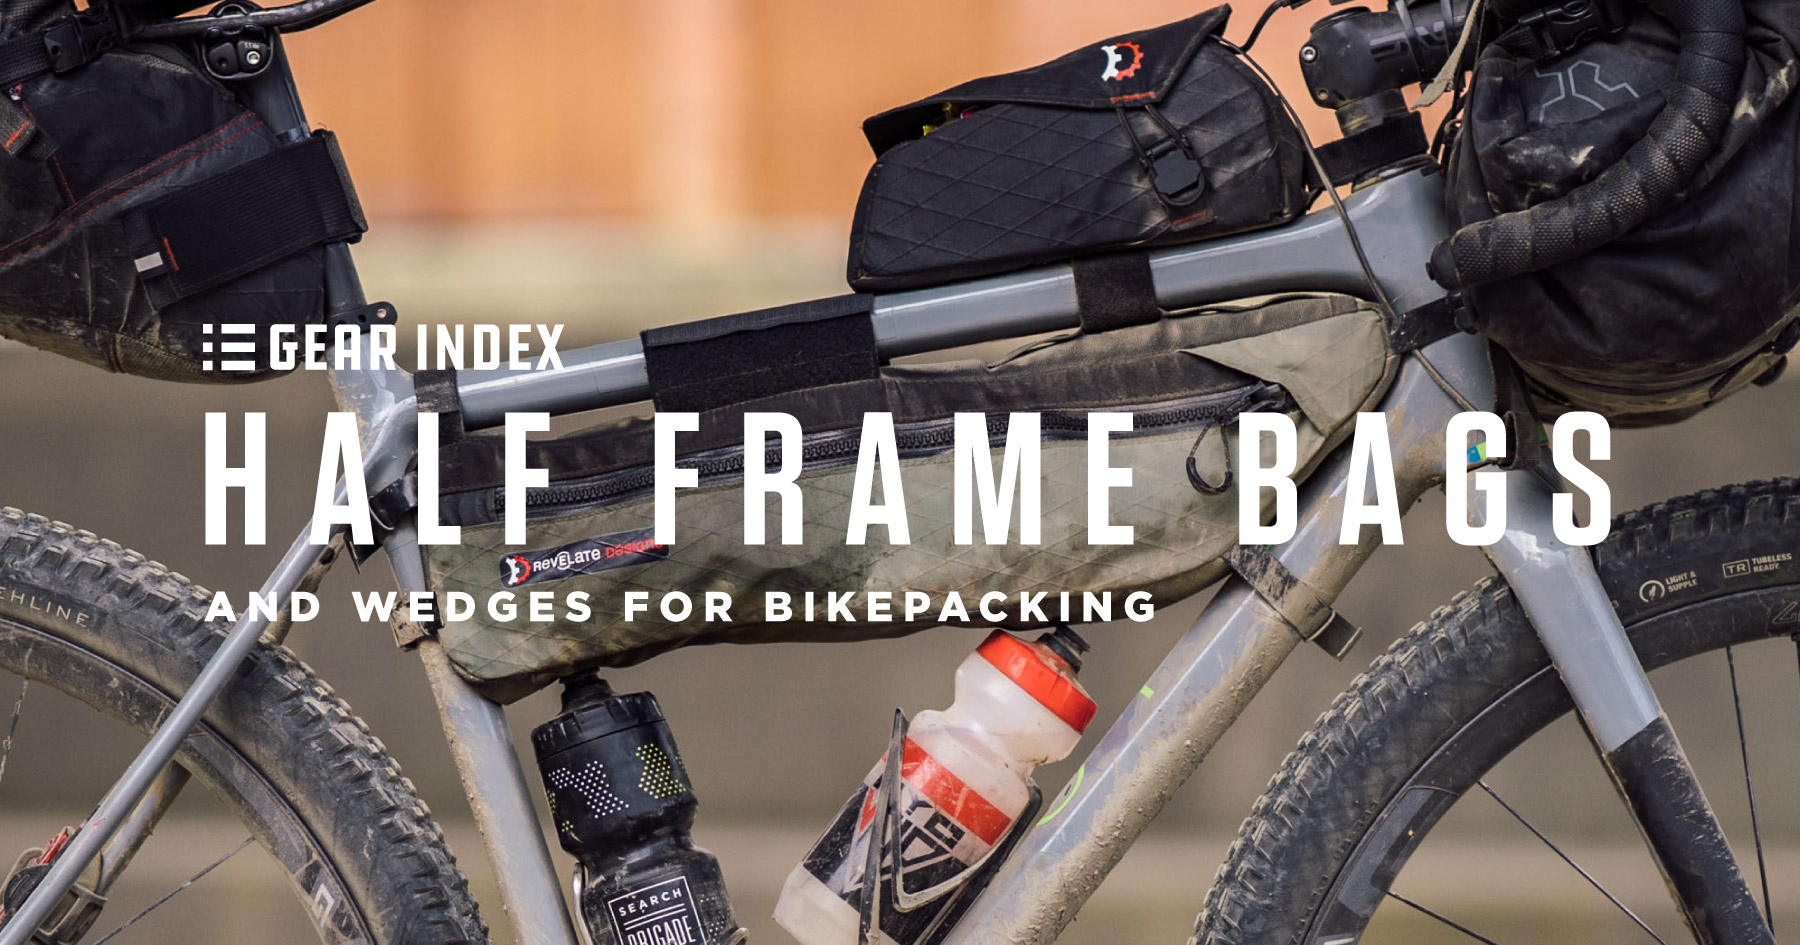 Half frame bags and wedges for bikepacking